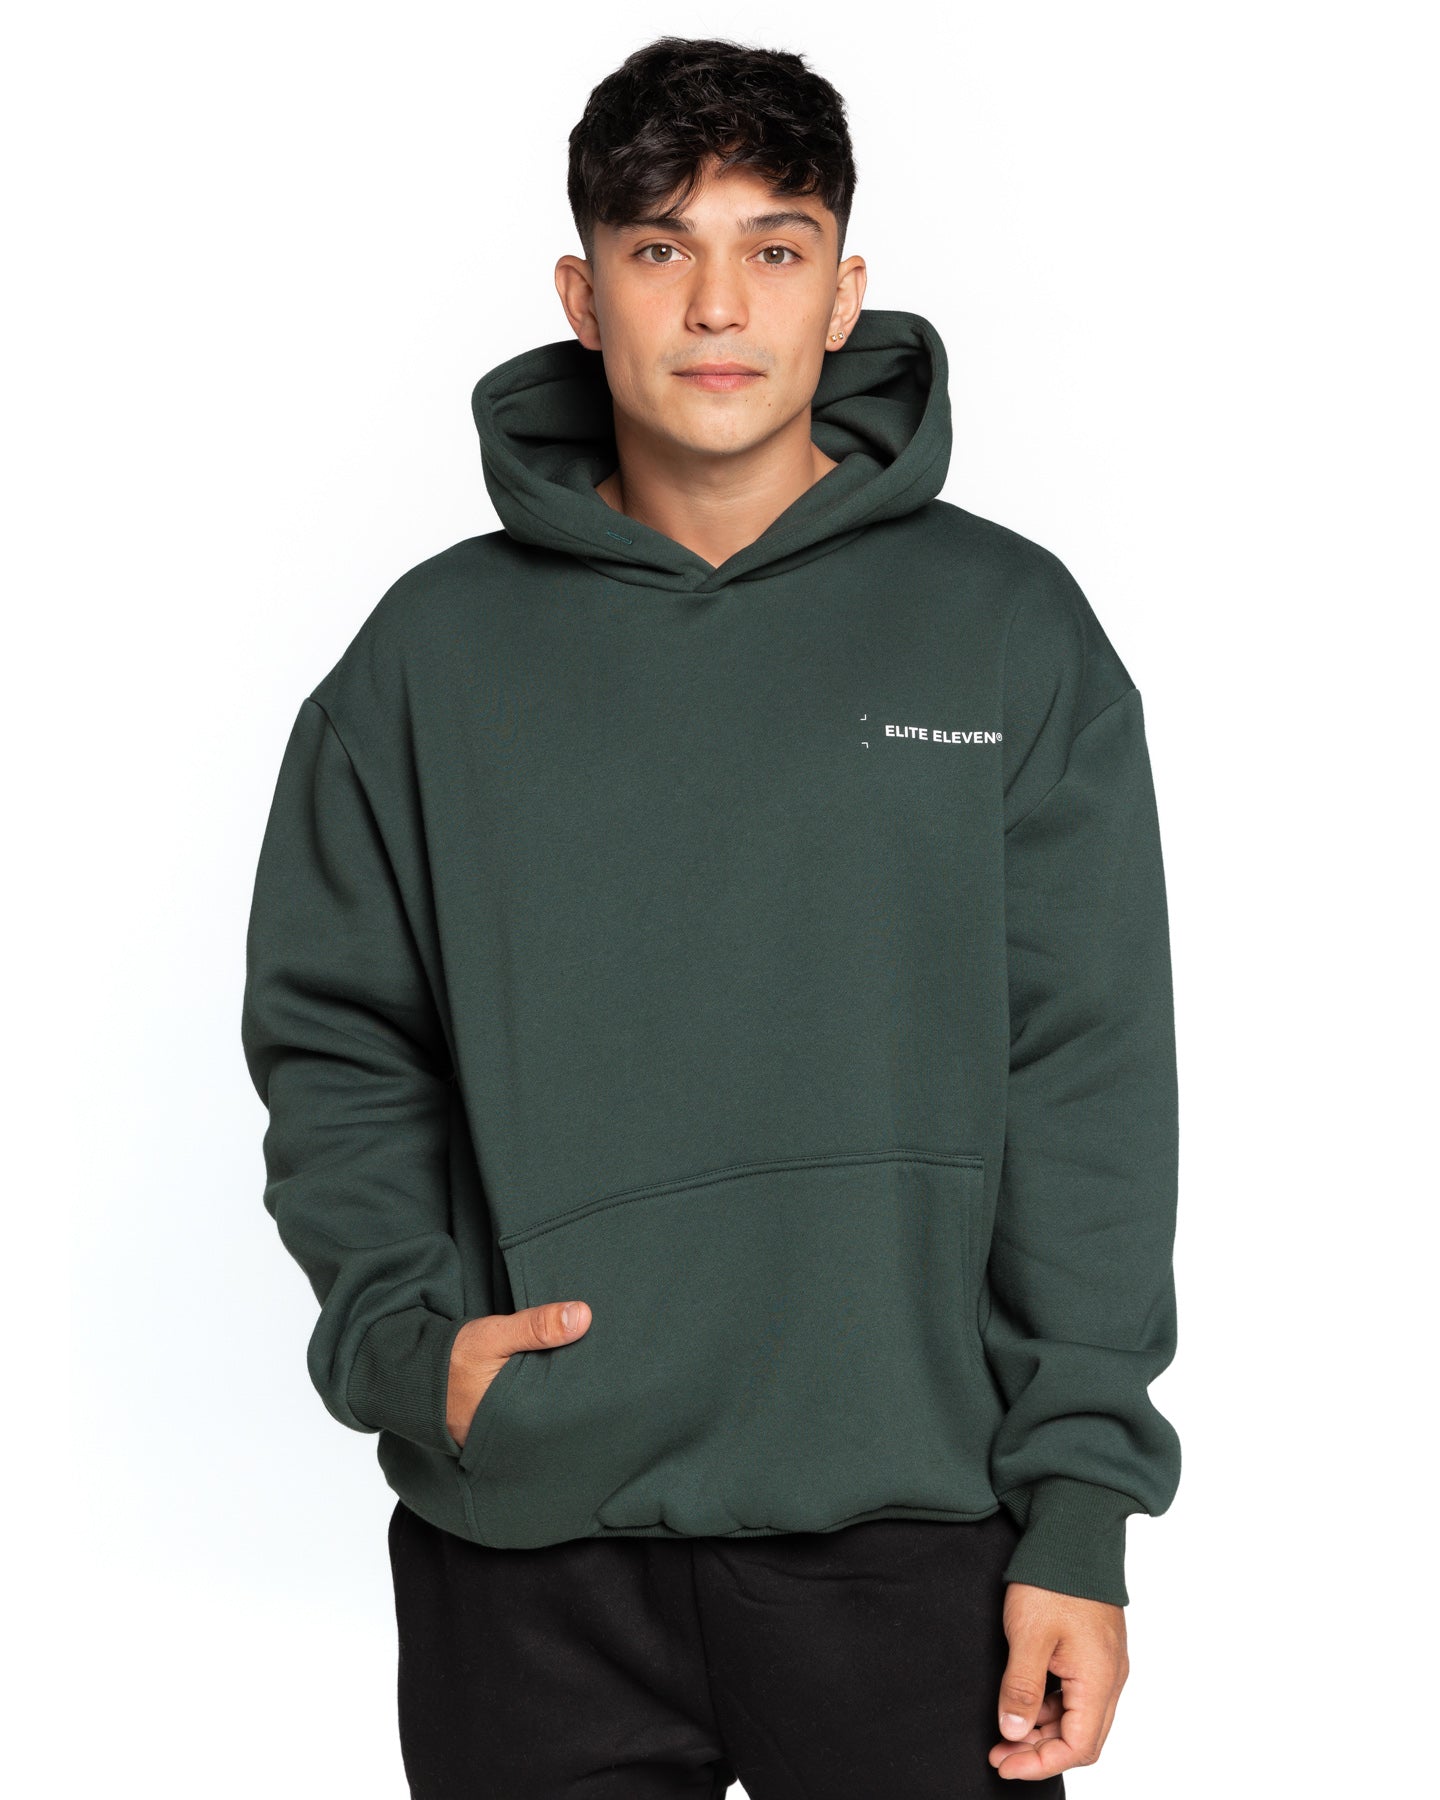 Capital Hoodie - Forest – Elite Eleven